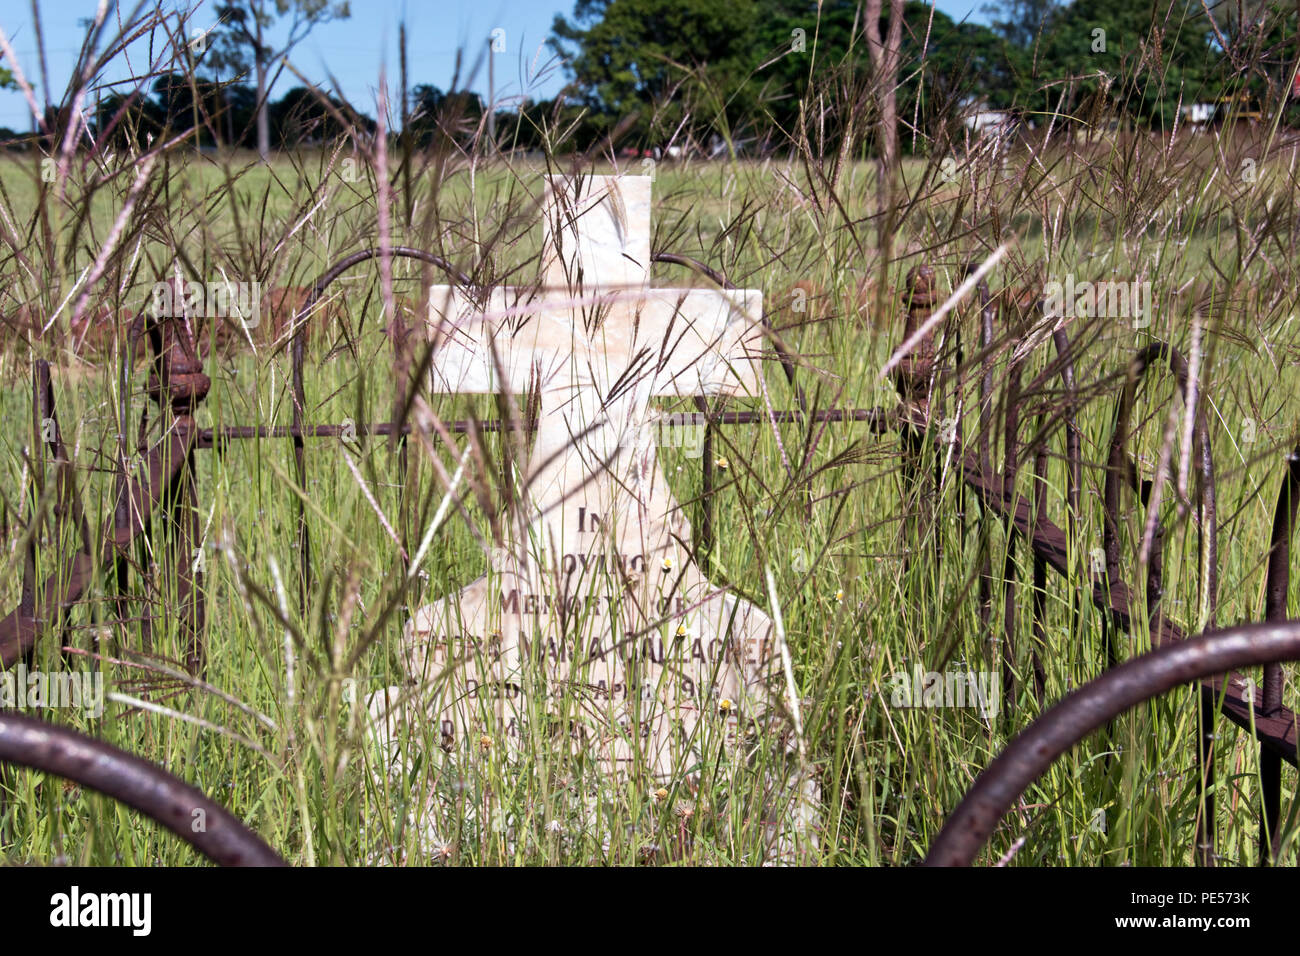 The grave of an infant who died in 1916 in the Mount Surprise cemetery, an Outback town in Far North Queensland, Australia. Stock Photo